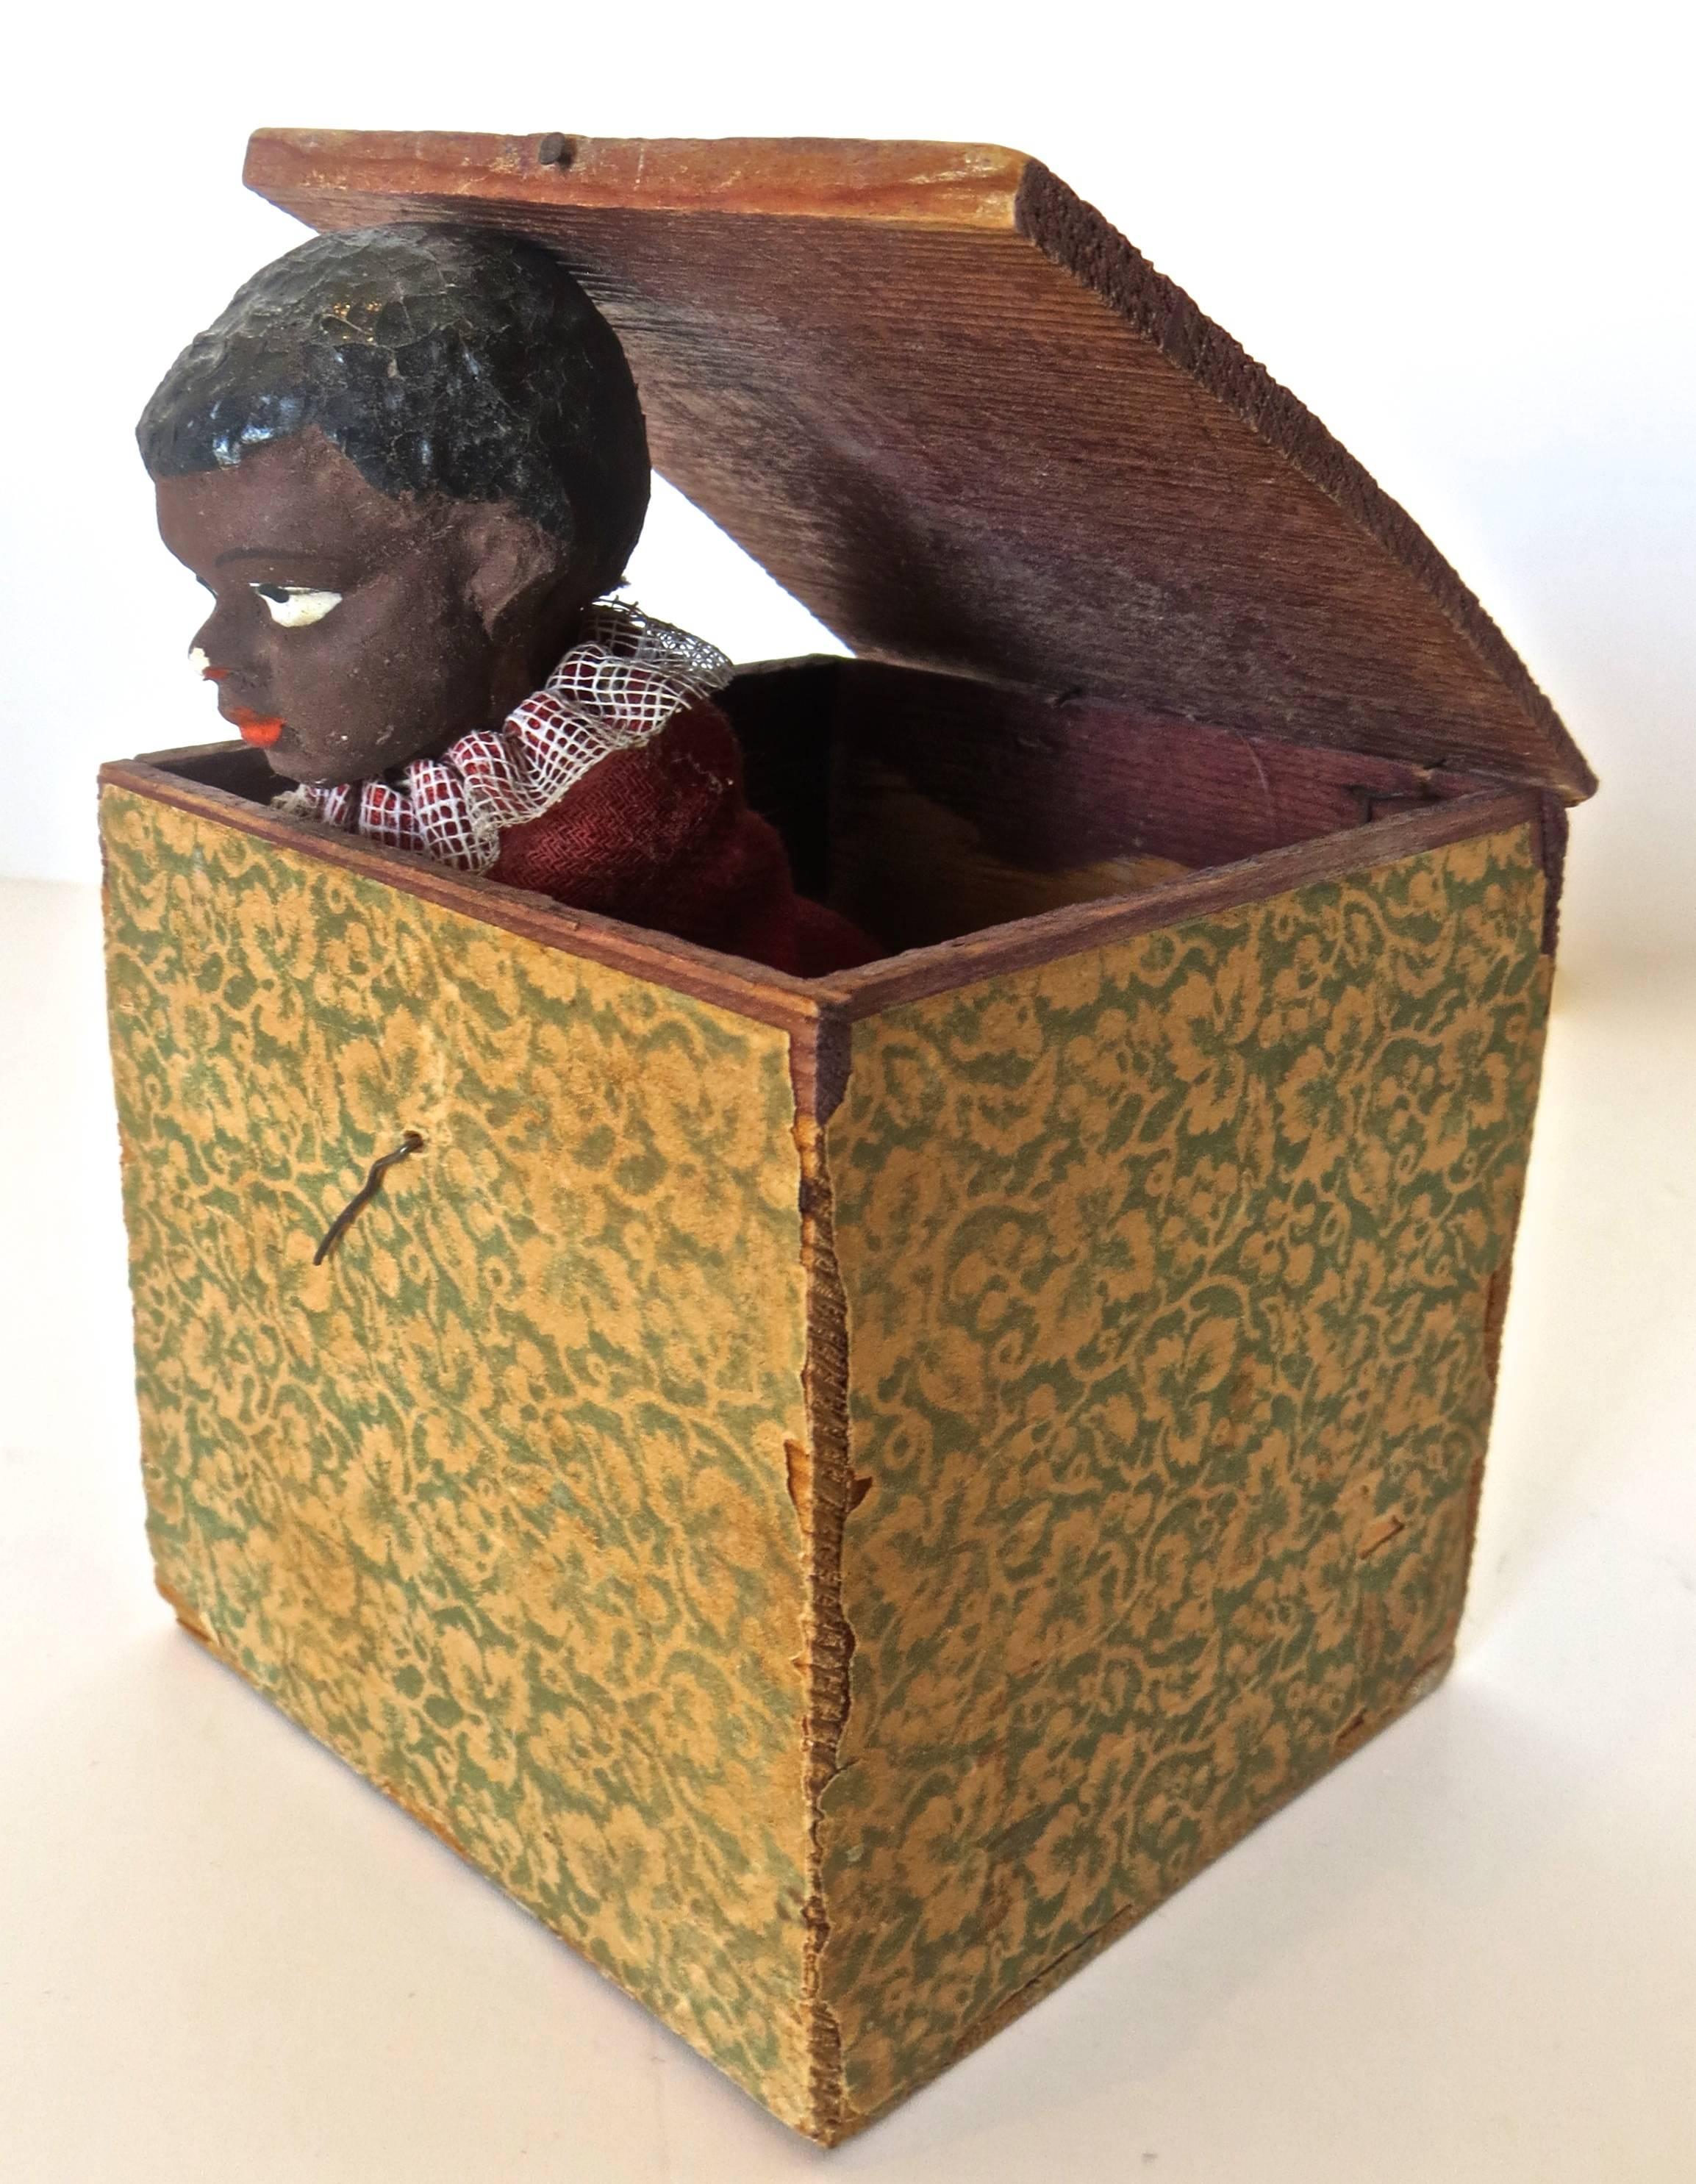 Jack-in-the-box toys date from 15th century England, but became very prevalent from the middle of the 19th century until present day.

This rare black themed toy Jack-in-The-Box, circa 1890, is in all original hand paint and condition with no